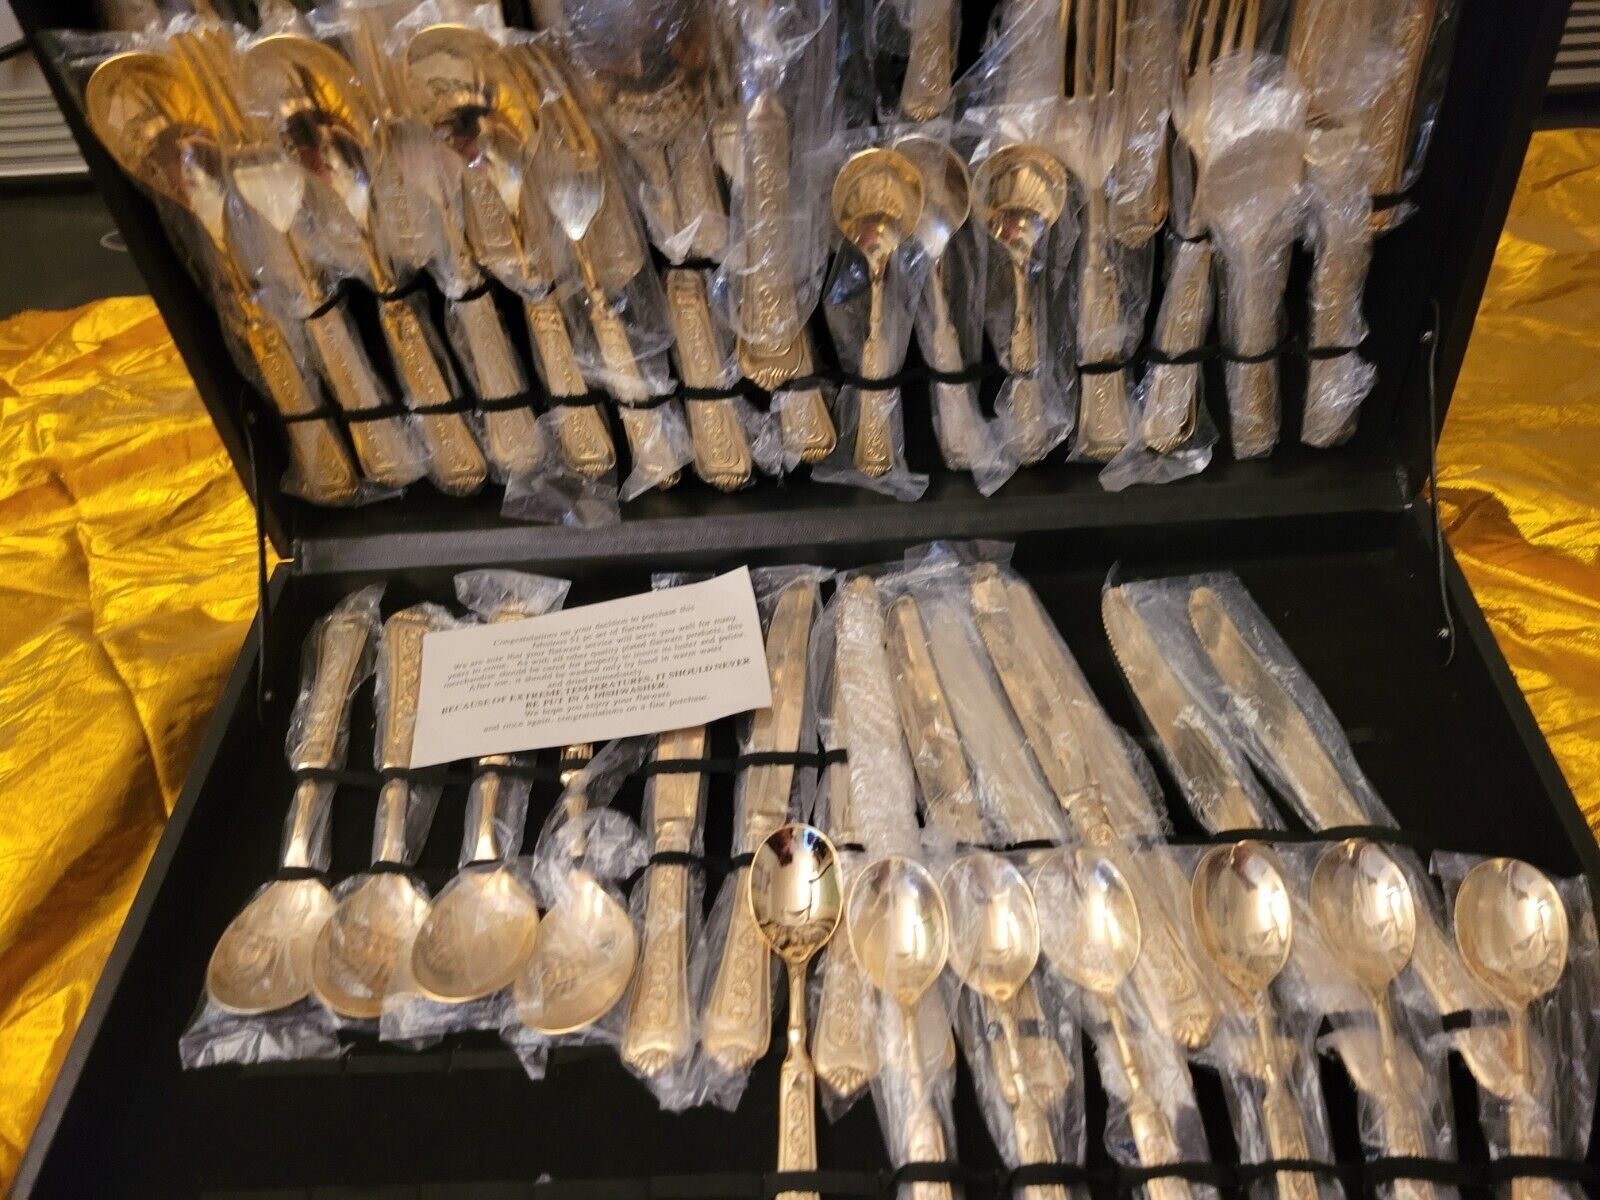 51 PIECE GOLDPLATED FLATWARE WITH CHEST - VINTAGE DINNERWARE SET - # 99110015 